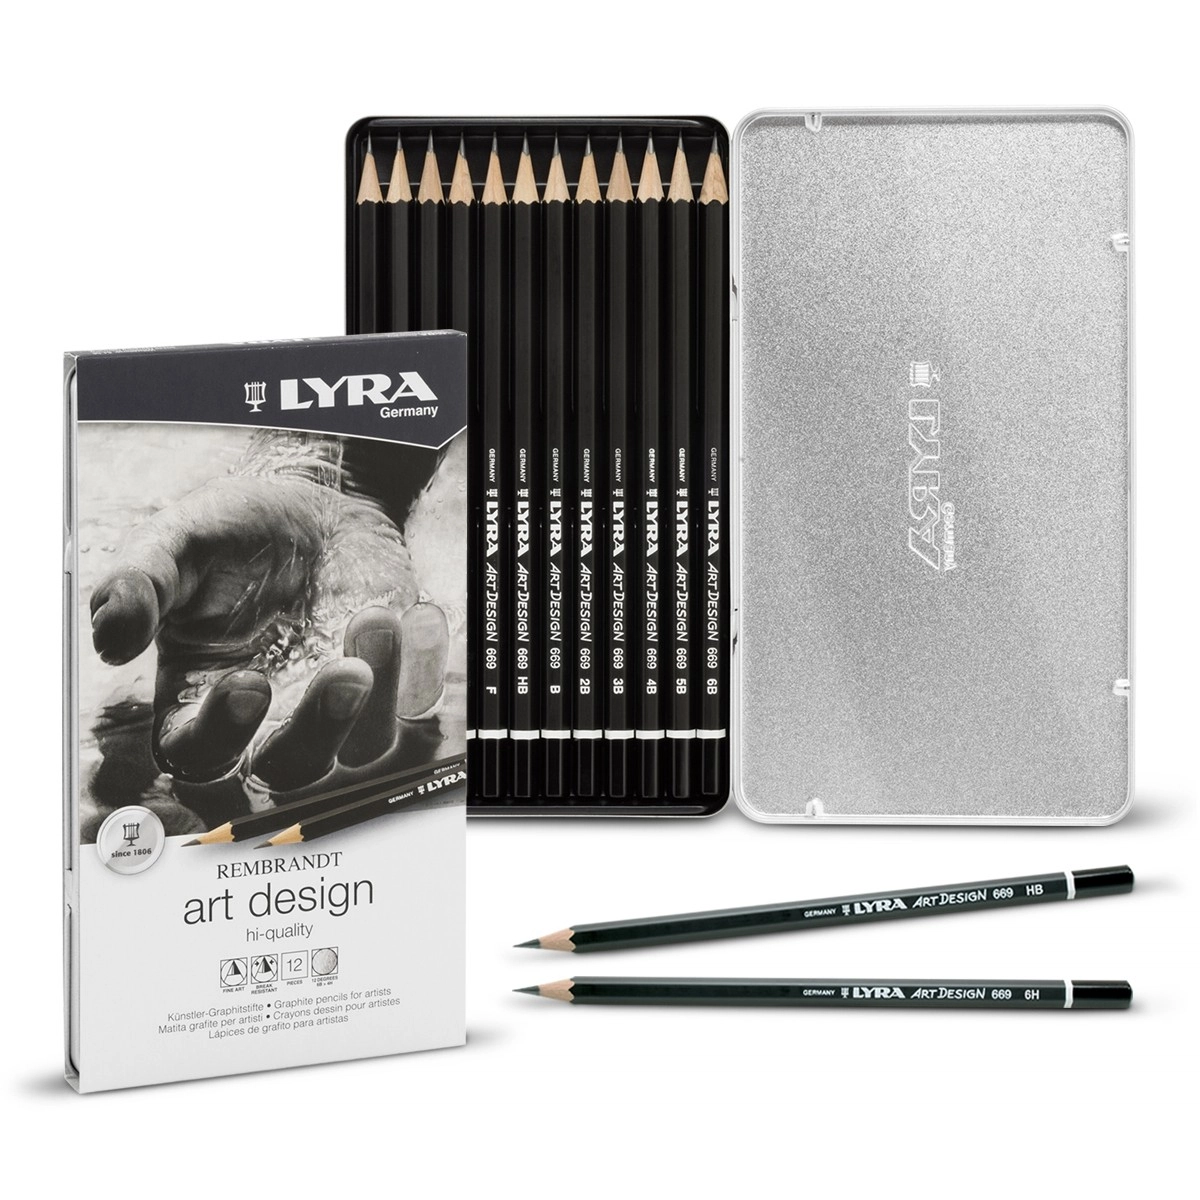 Lyra Graphit Stick - Water Soluble Graphite Shading and Sketching Crayon -  Pack of 3-2B / 6B / 9B